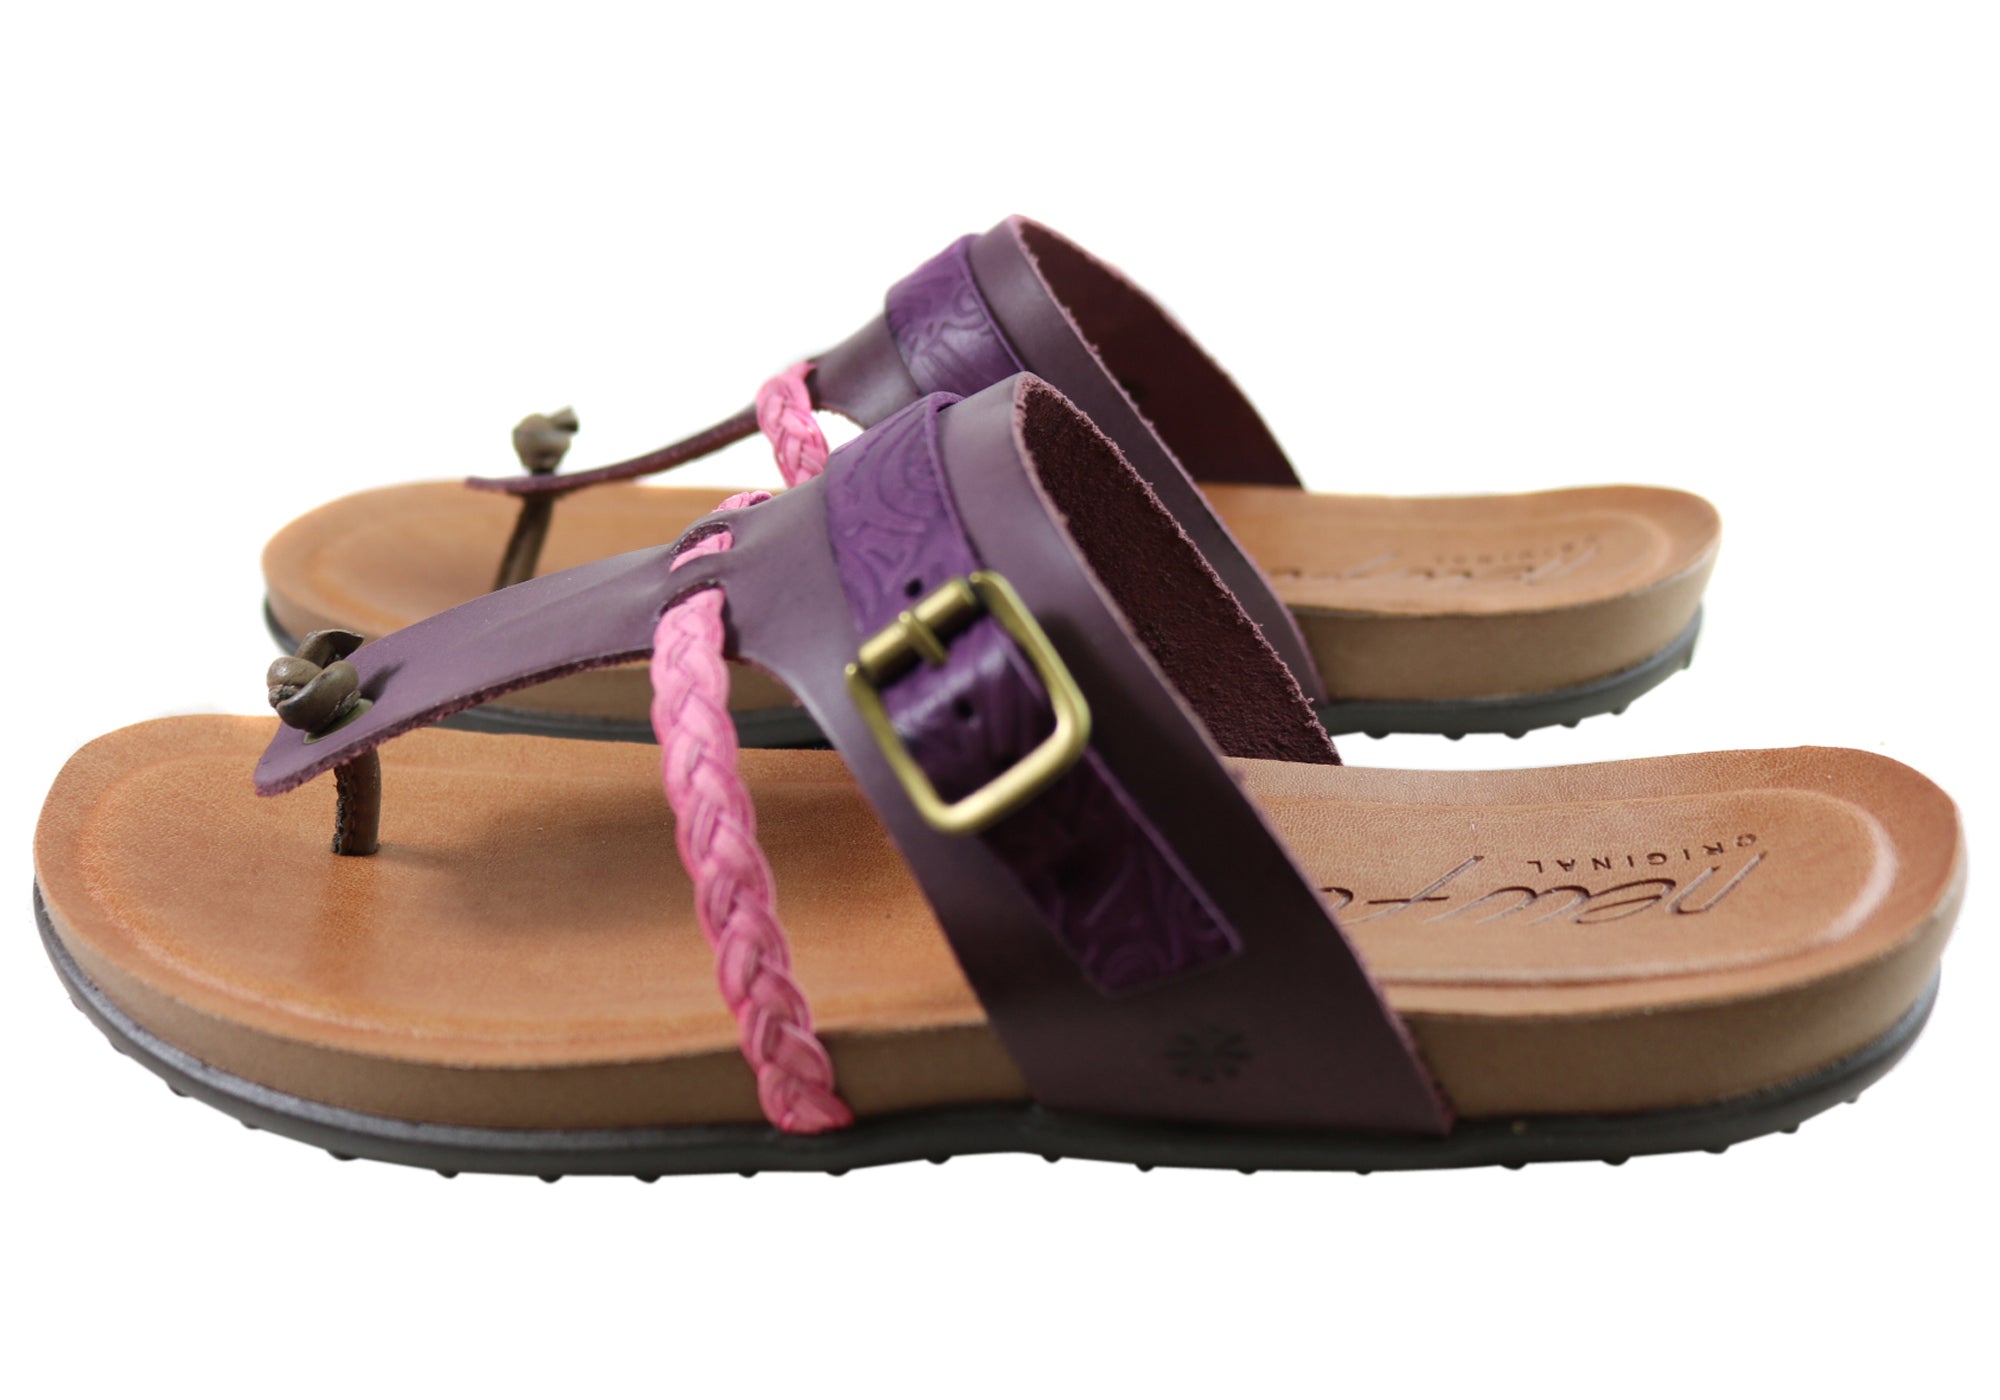 New Face Palms Womens Comfortable Leather Sandals Made In Brazil